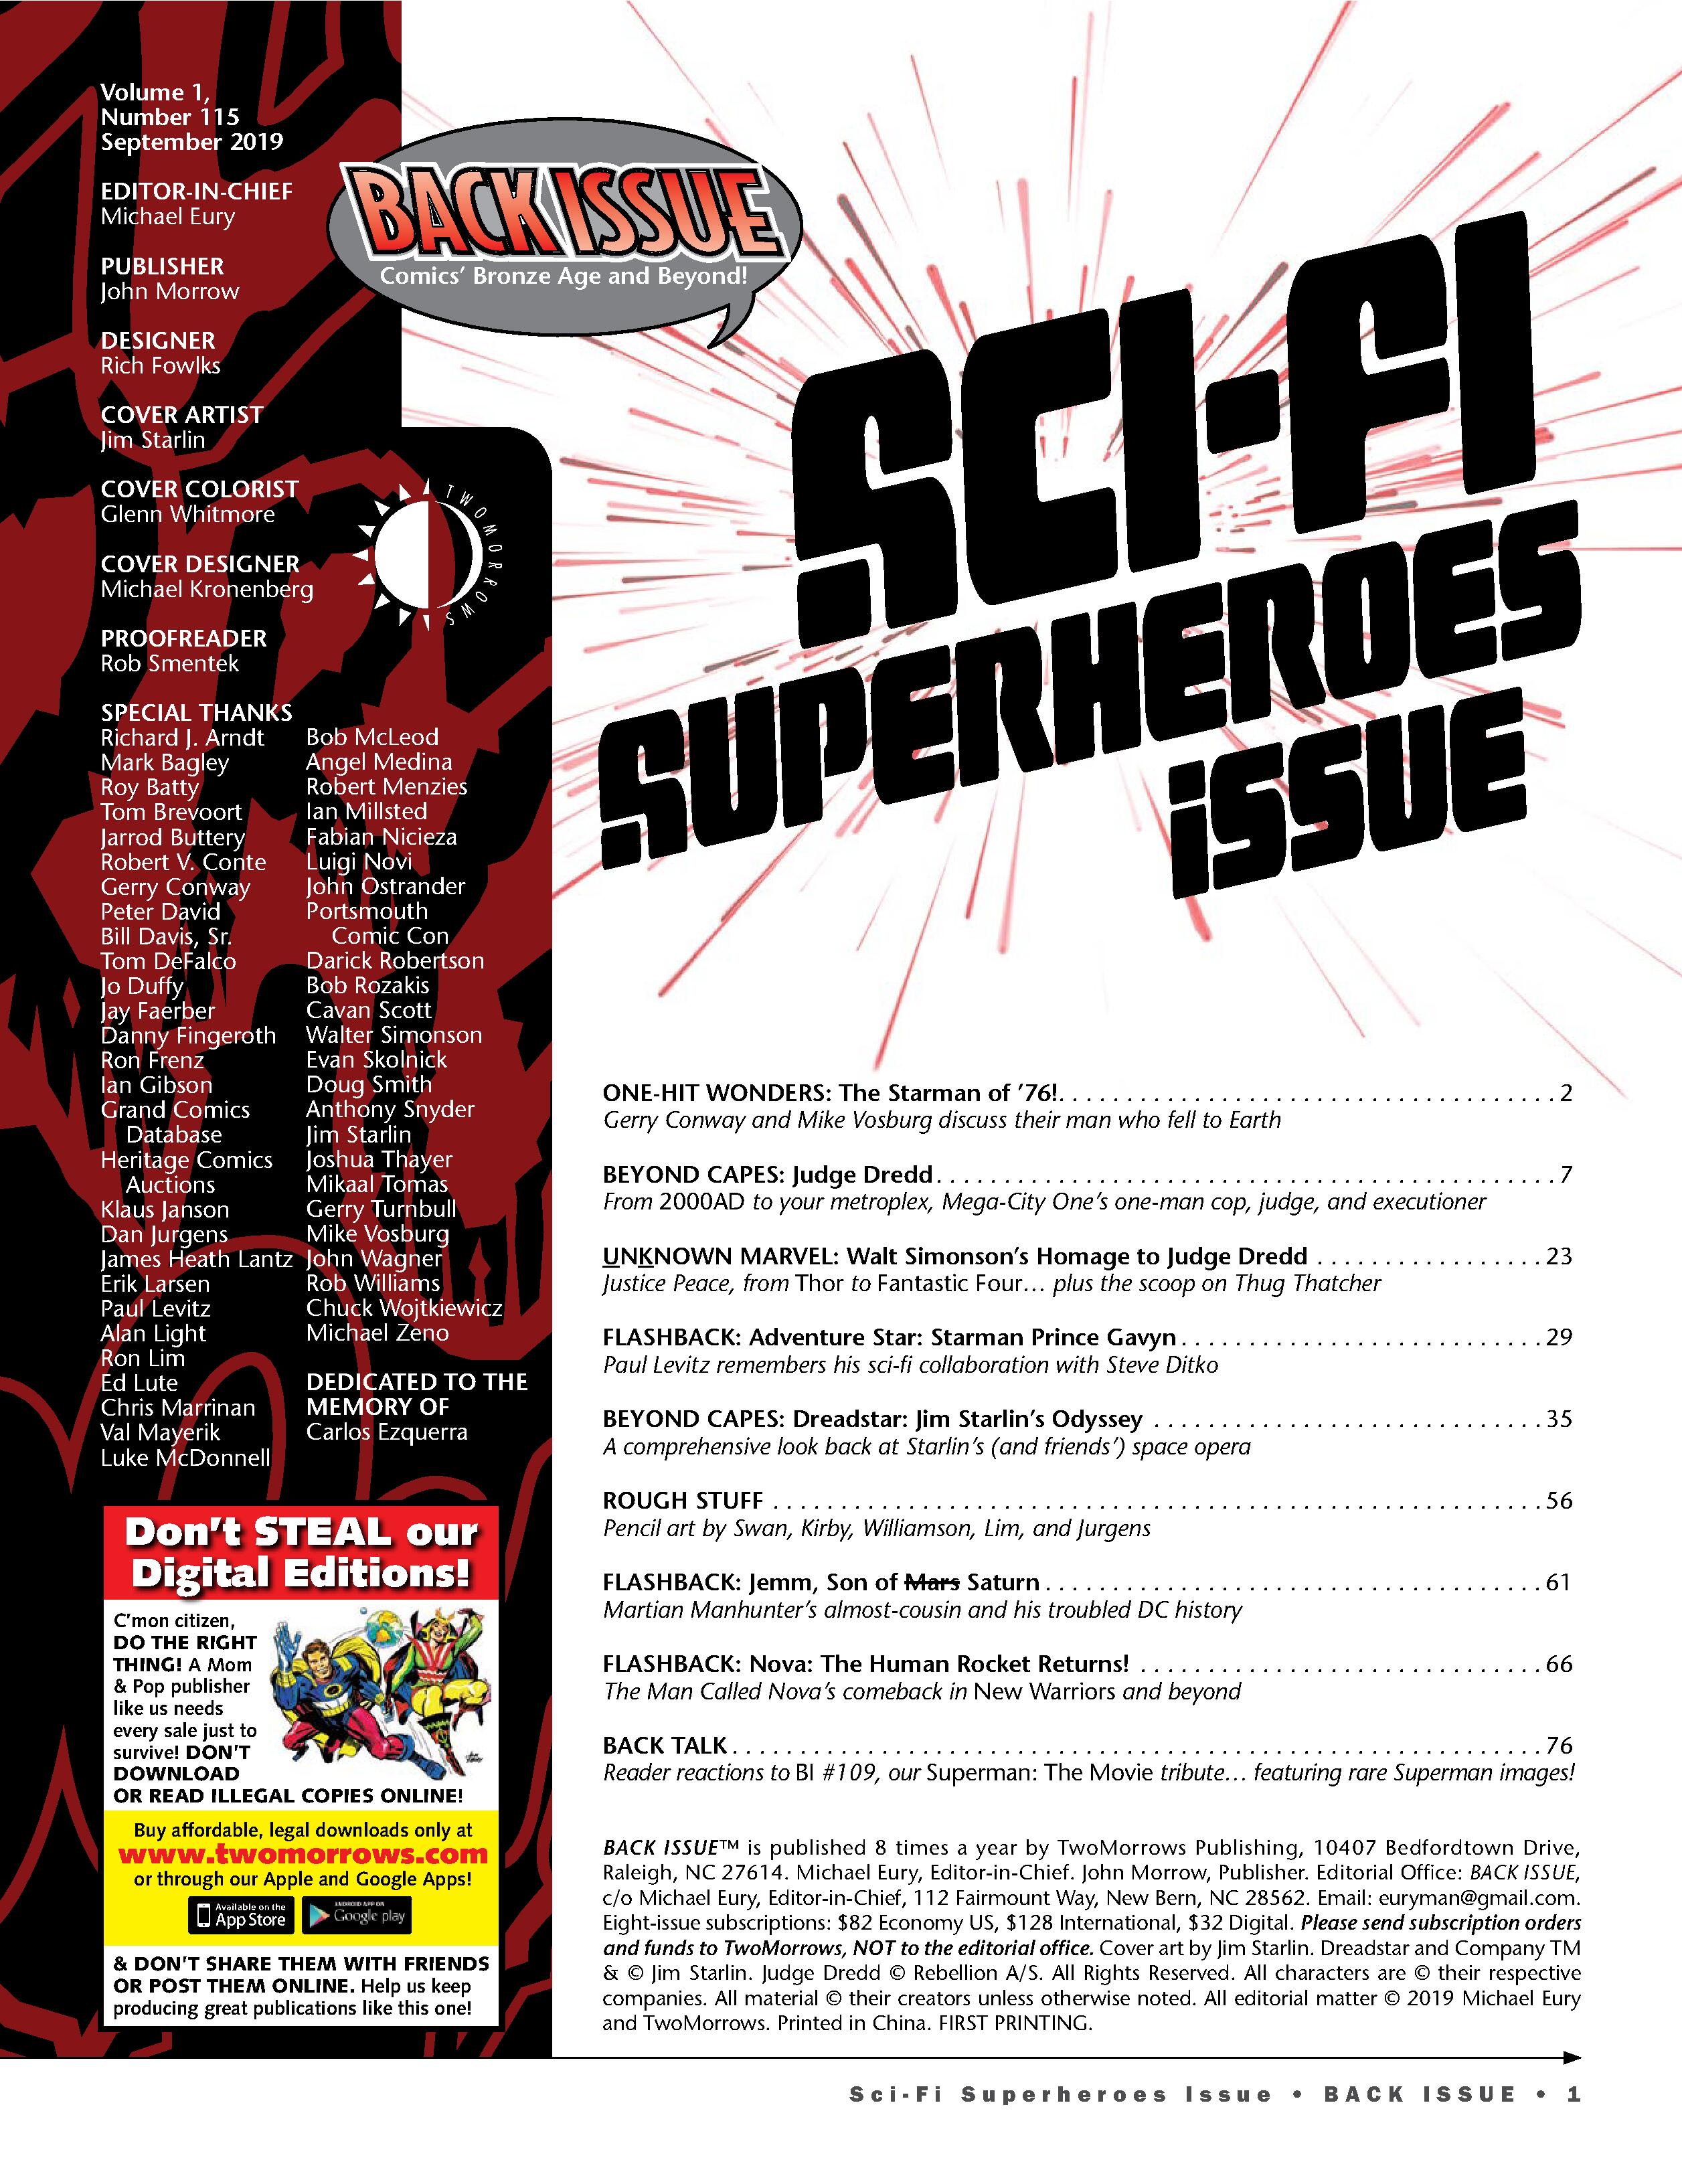 Read online Back Issue comic -  Issue #115 - 3